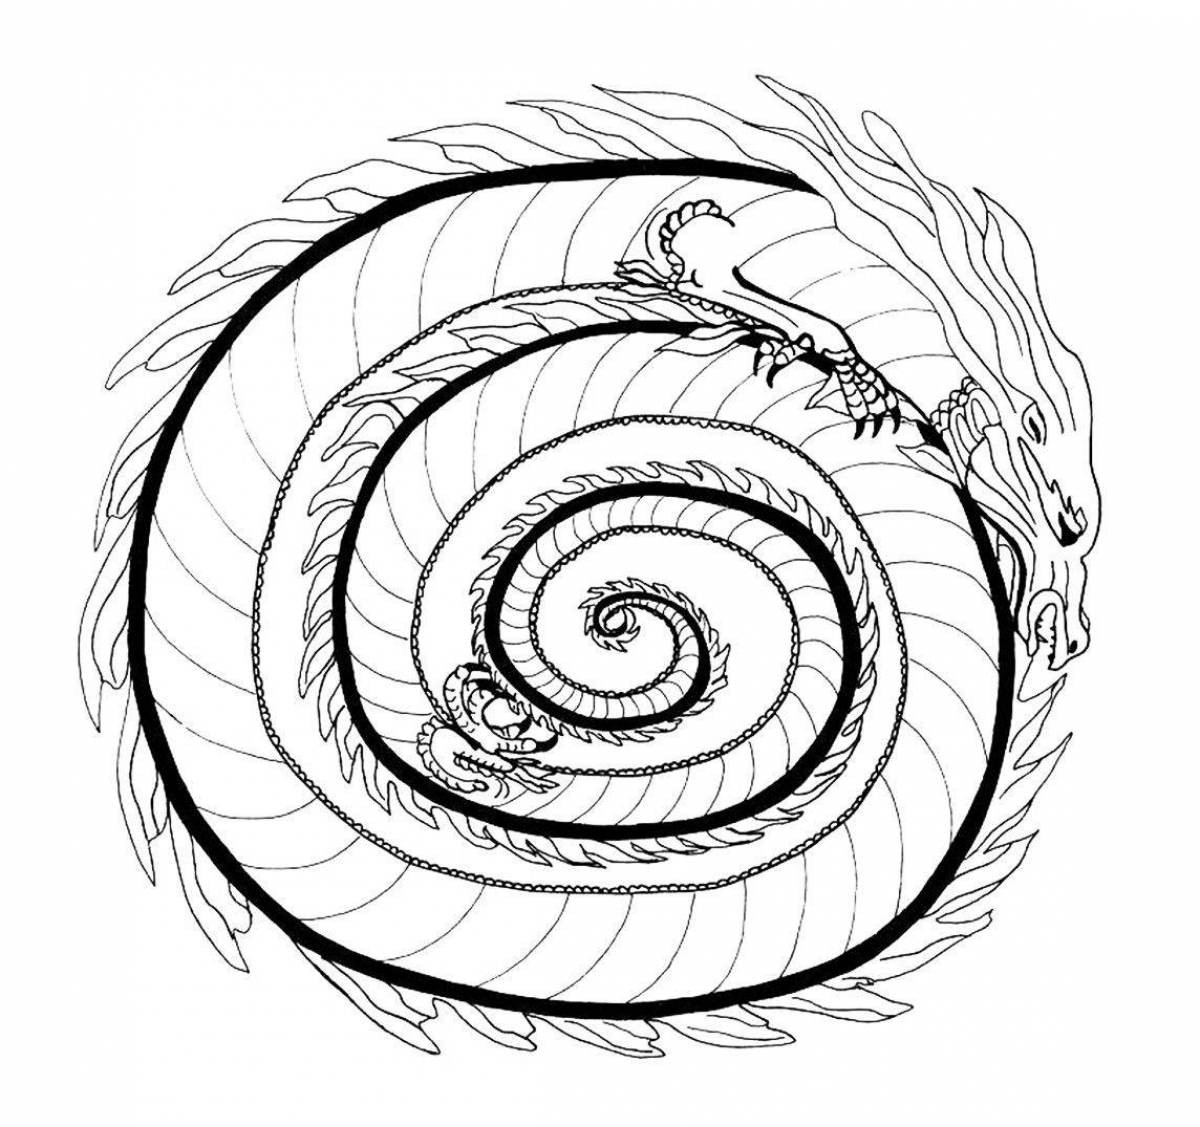 Charming spiral create coloring page